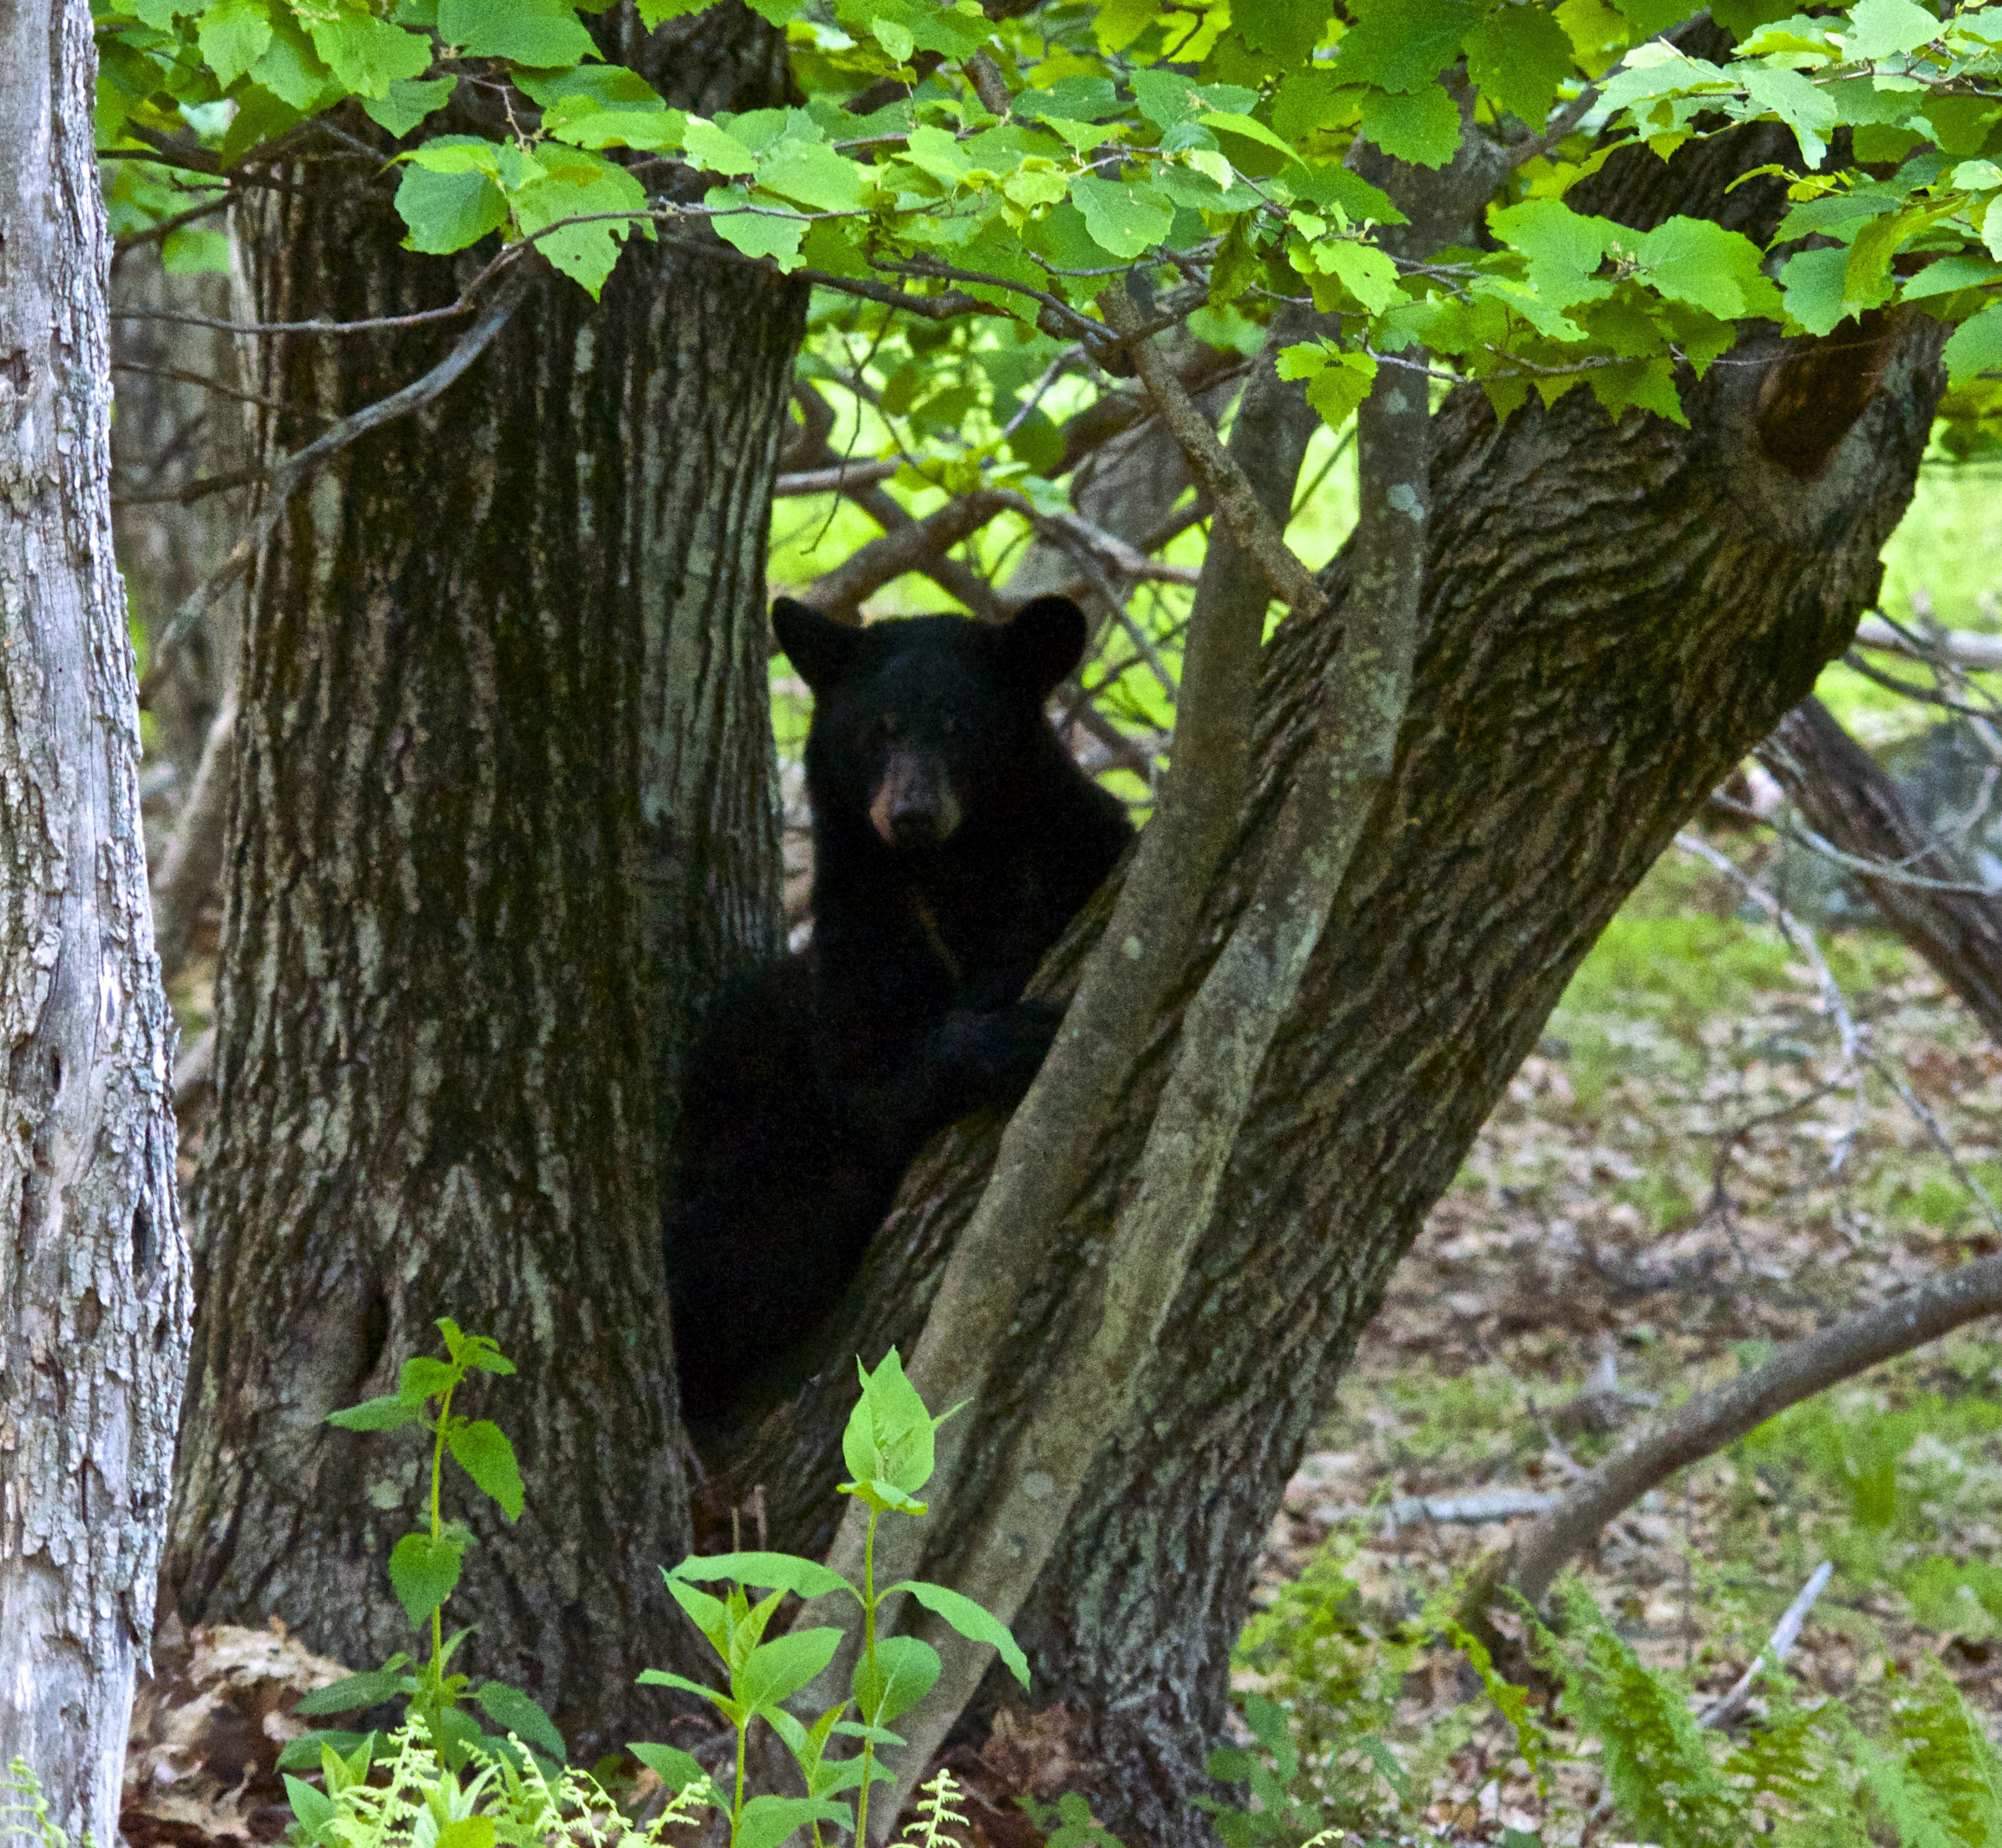 Shenandoah blackbear2a - What the National Press and the Park Service Won’t Tell You on the 100th Anniversary of NPS